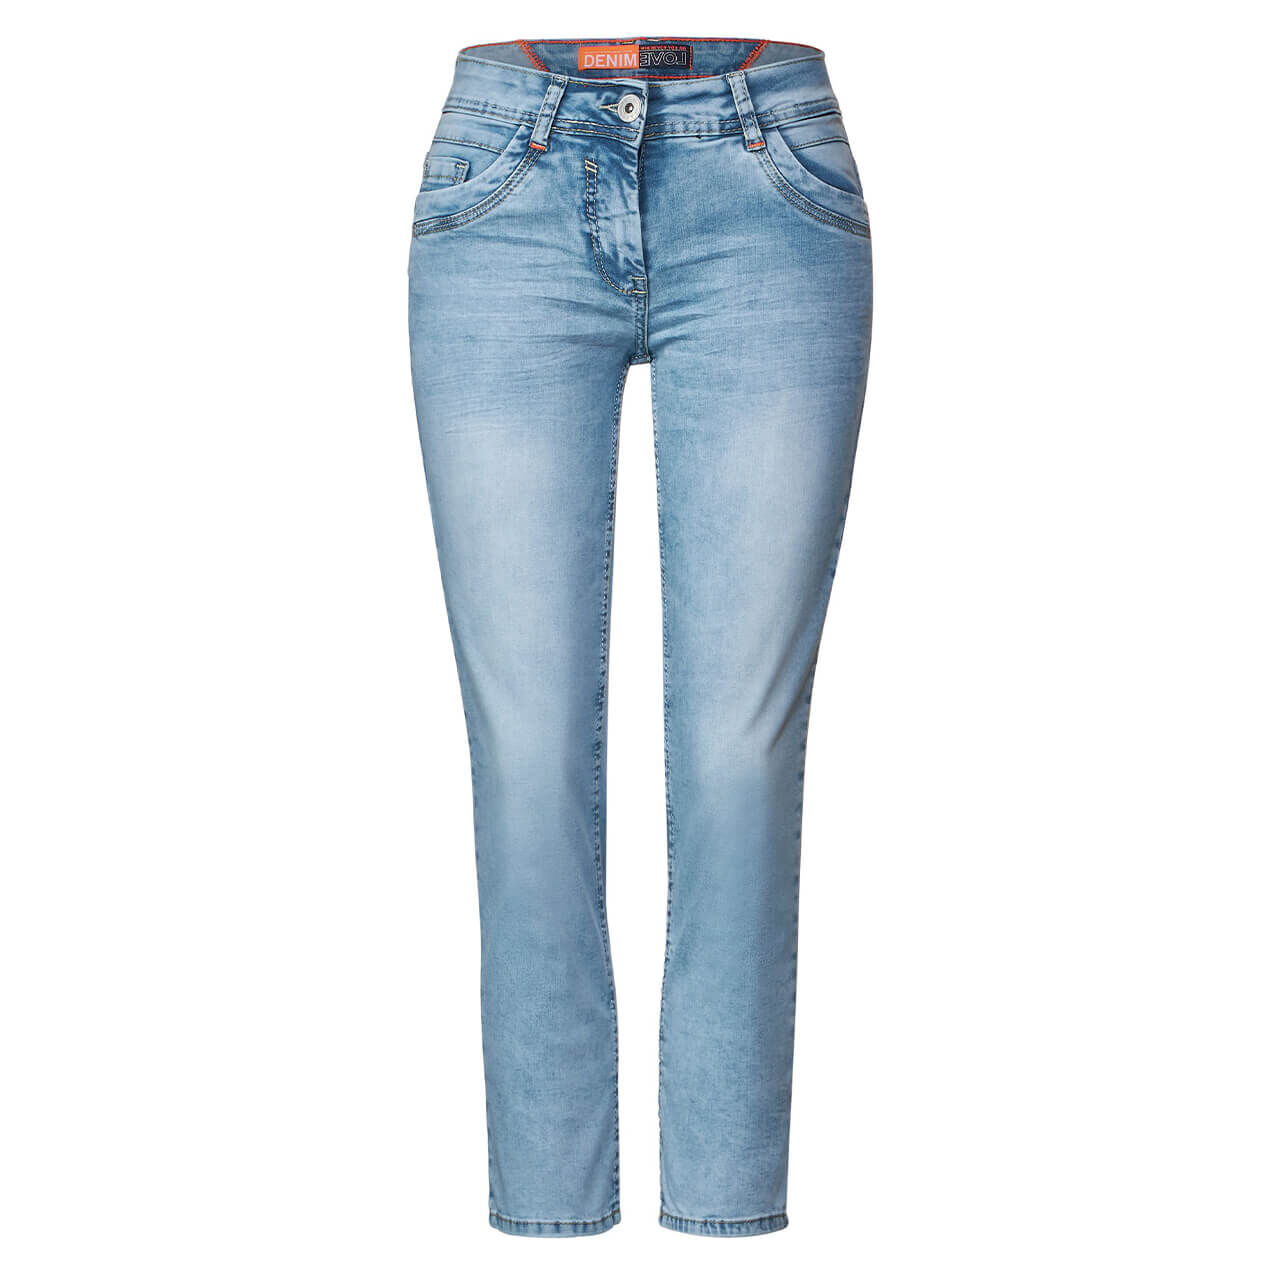 Cecil Scarlett 7/8 Jeans mid blue washed